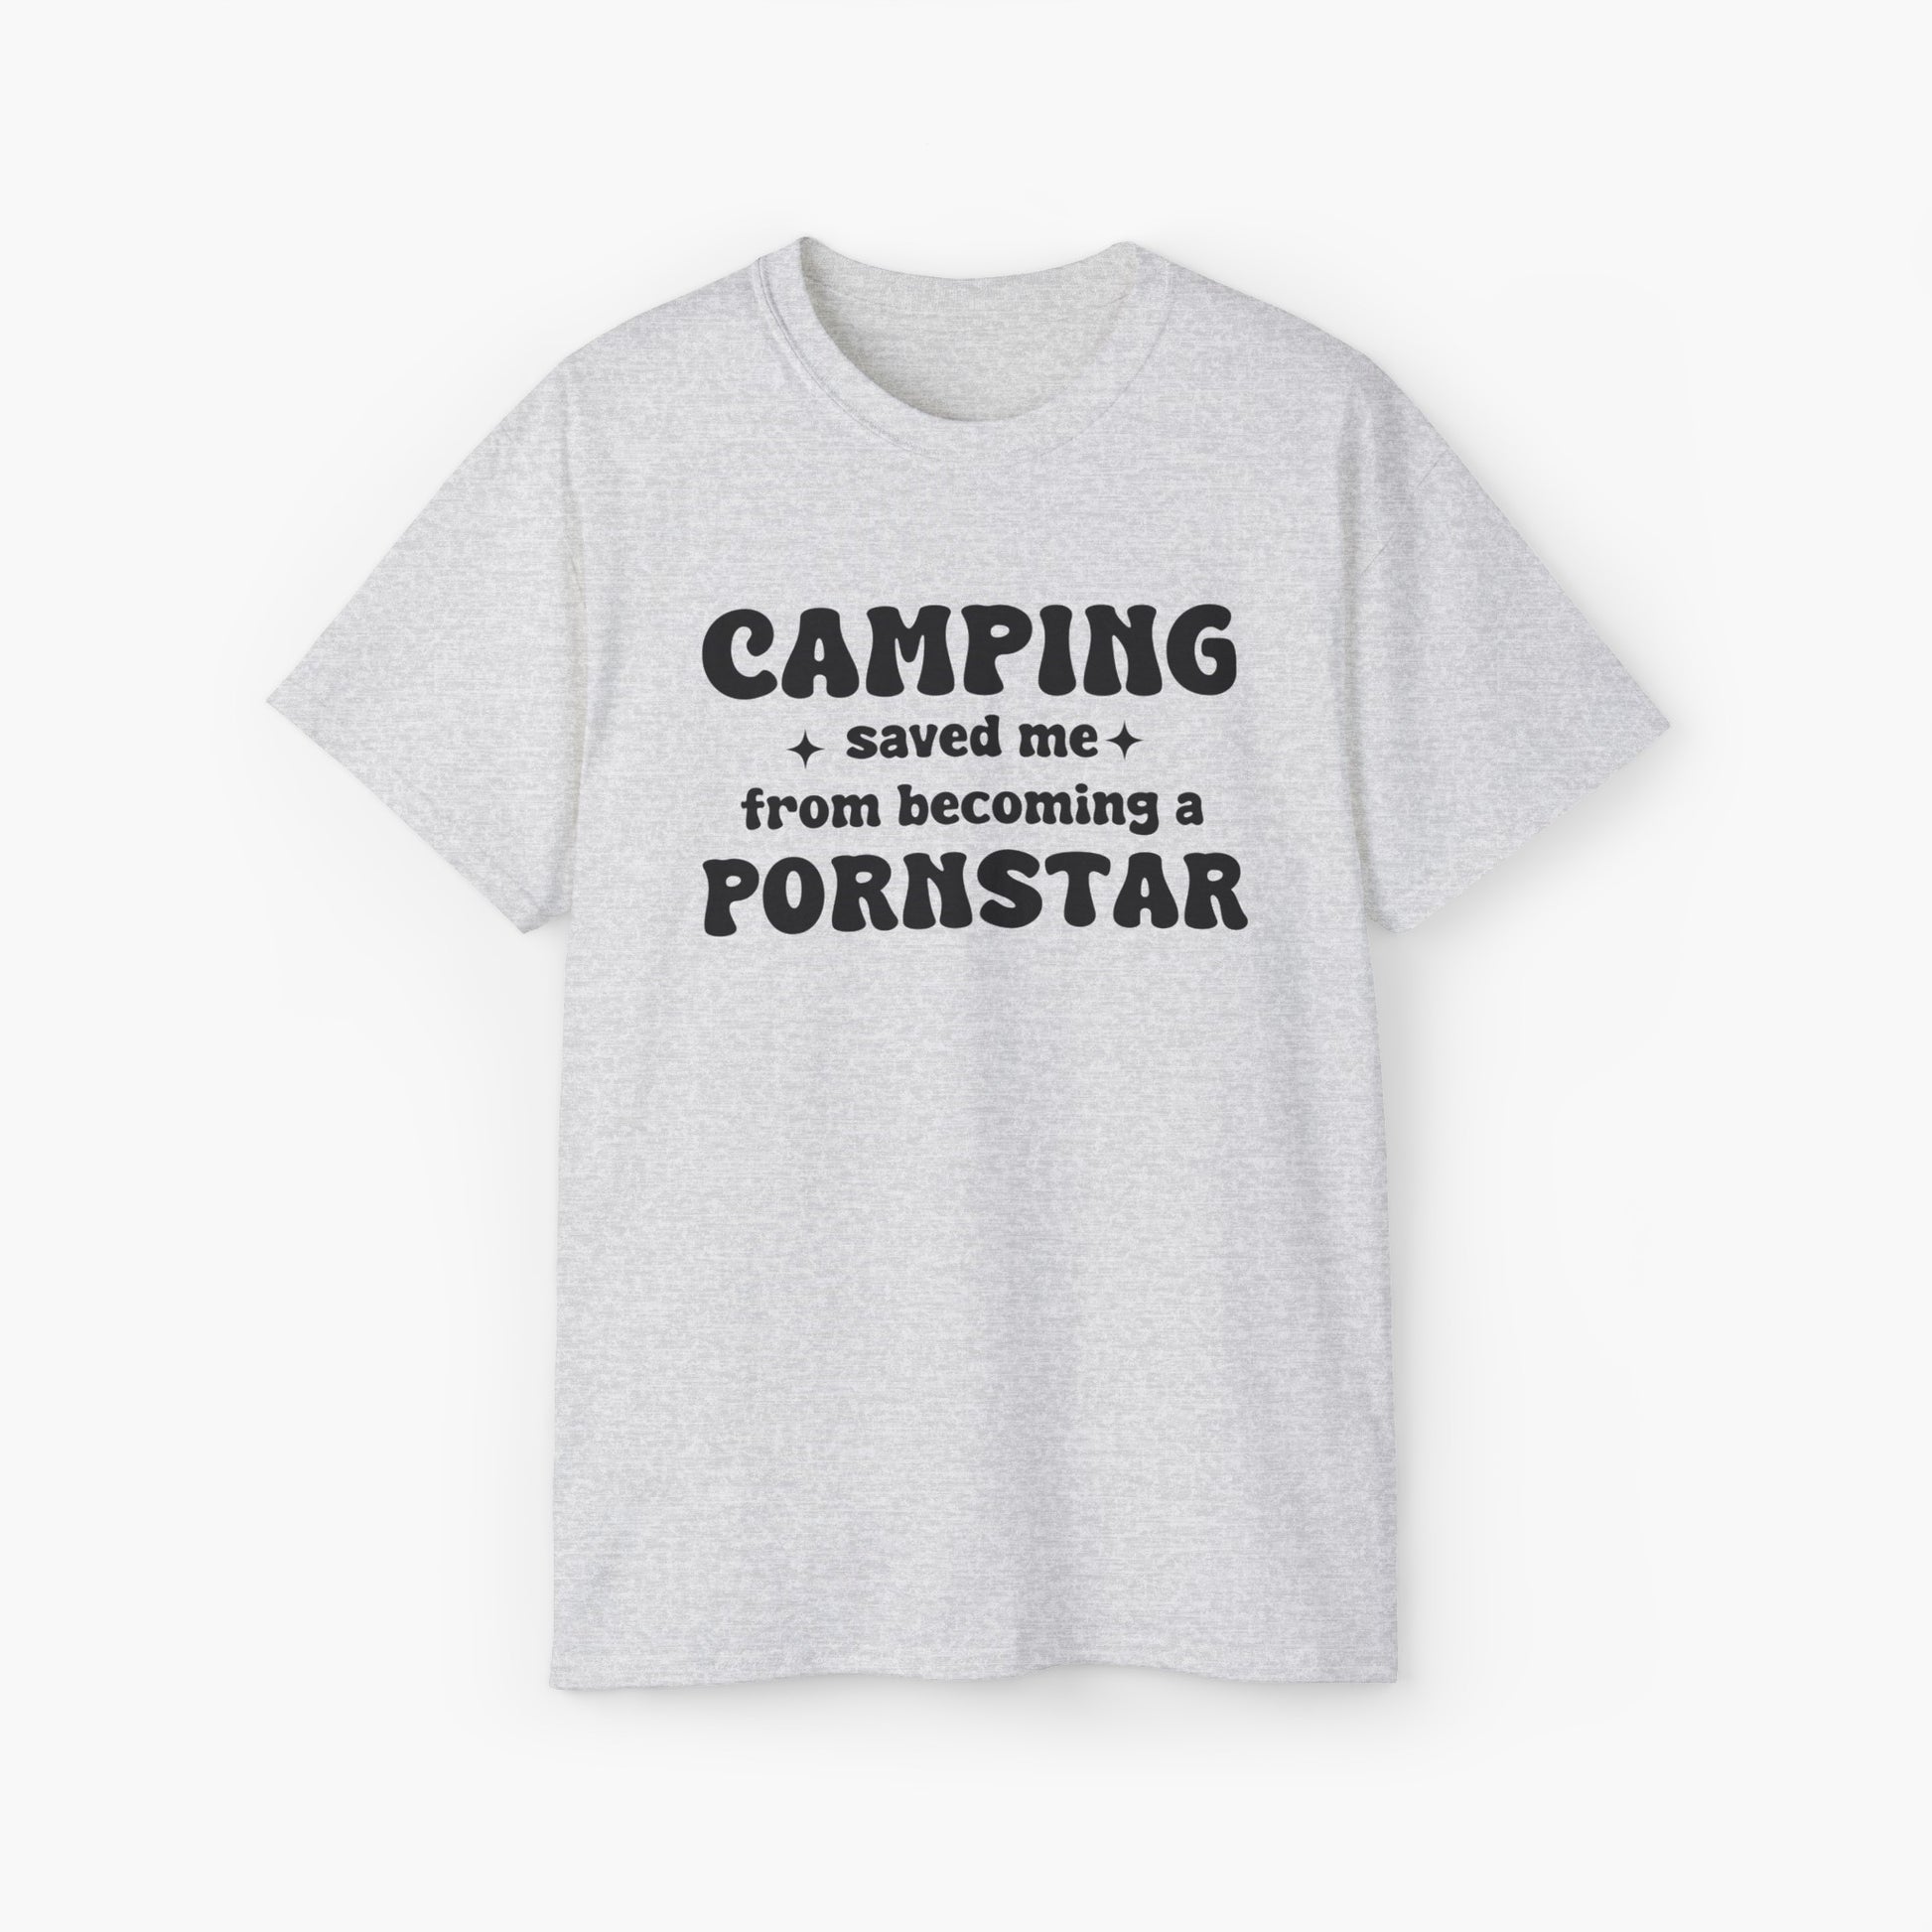 Light grey t-shirt with the bold statement 'Camping saved me from becoming a pornstar,' embellished with stars on a plain background.